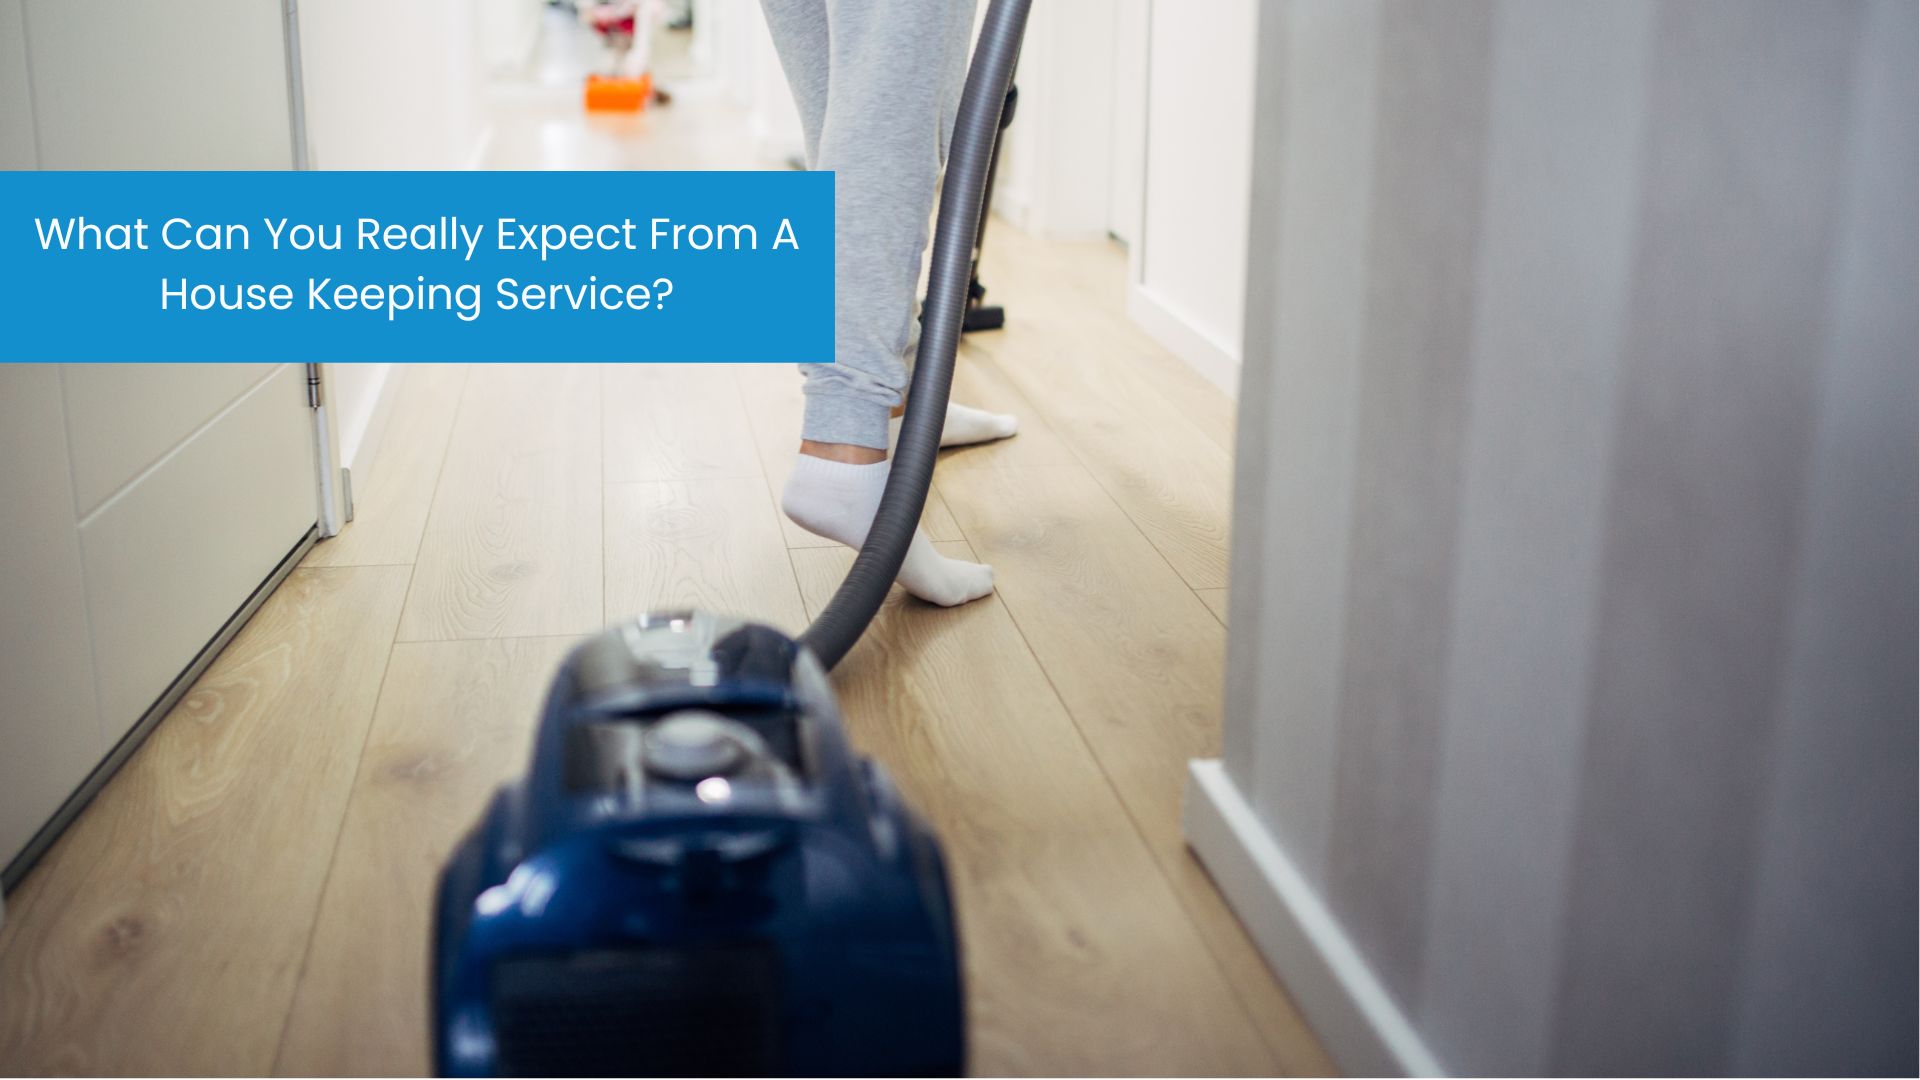 What Can You Really Expect From A House Keeping Service?